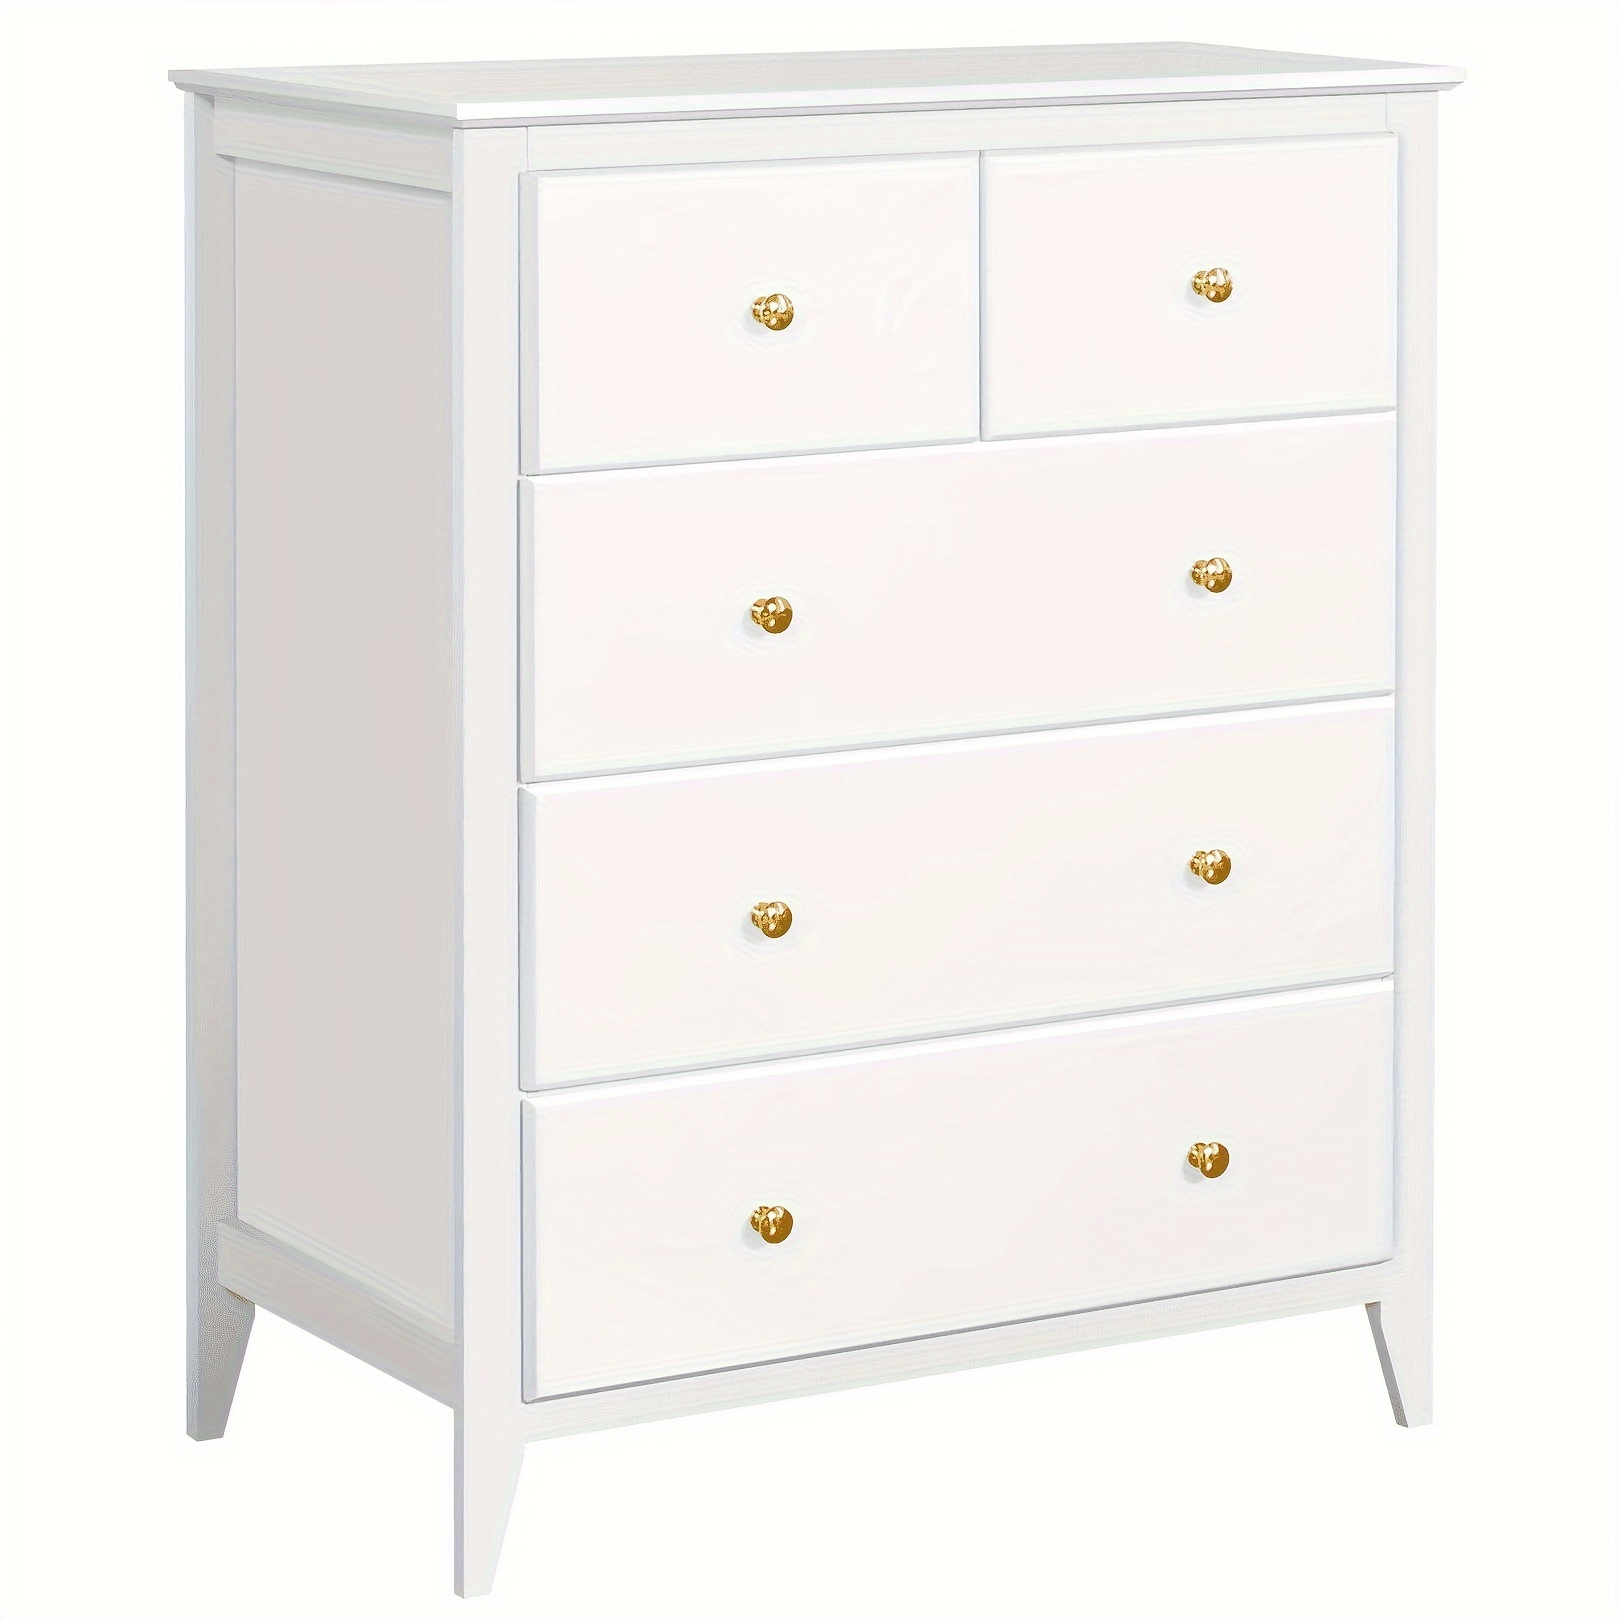 

5 Drawer White Double Dresser For Bedroom, Modern Chest Of Drawers For Storage Cabinet, Tv Stand With Easy Pull Out Gold Metal Handles For Living Room, Organizer For Nightstand